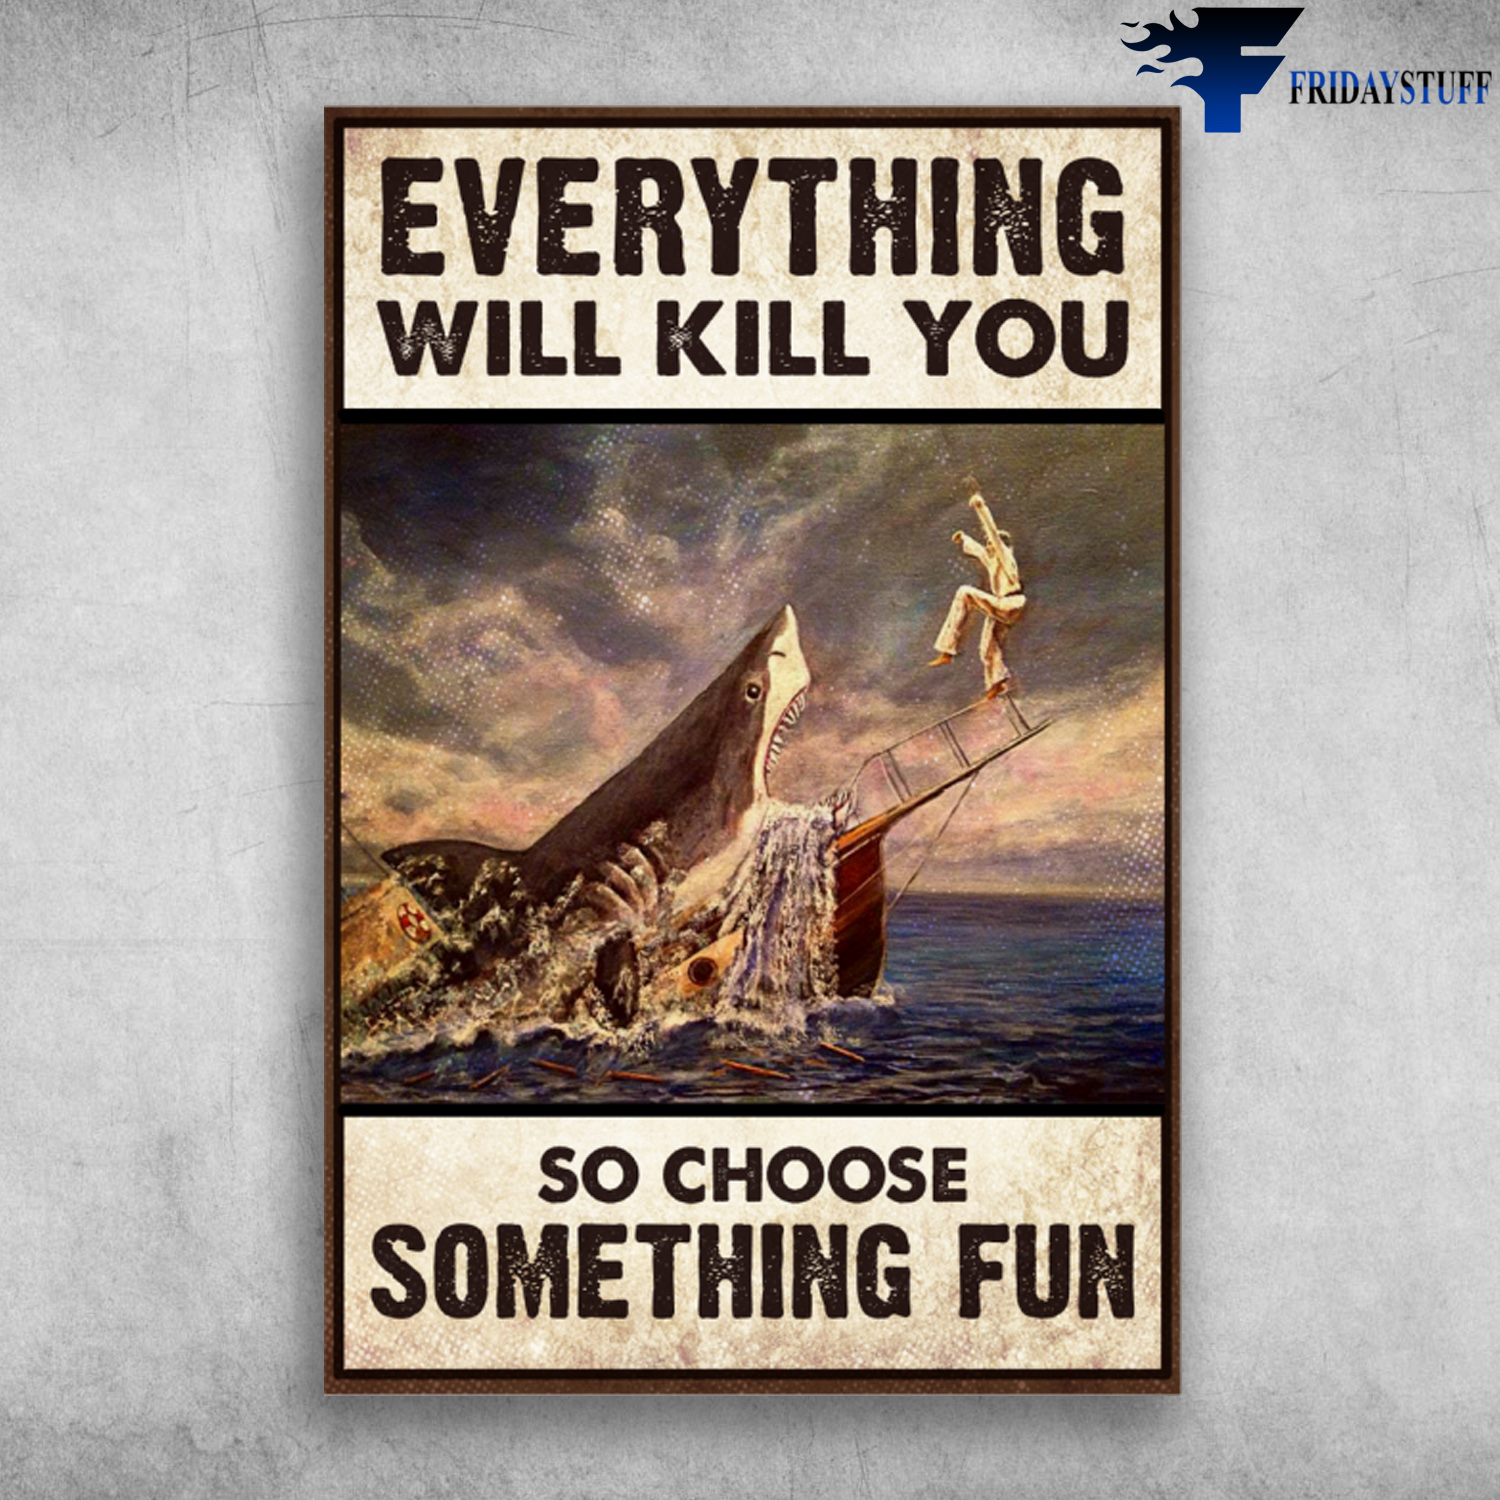 Sharks Attack The Man - Everything Will Kill You, So Choose Something Fun